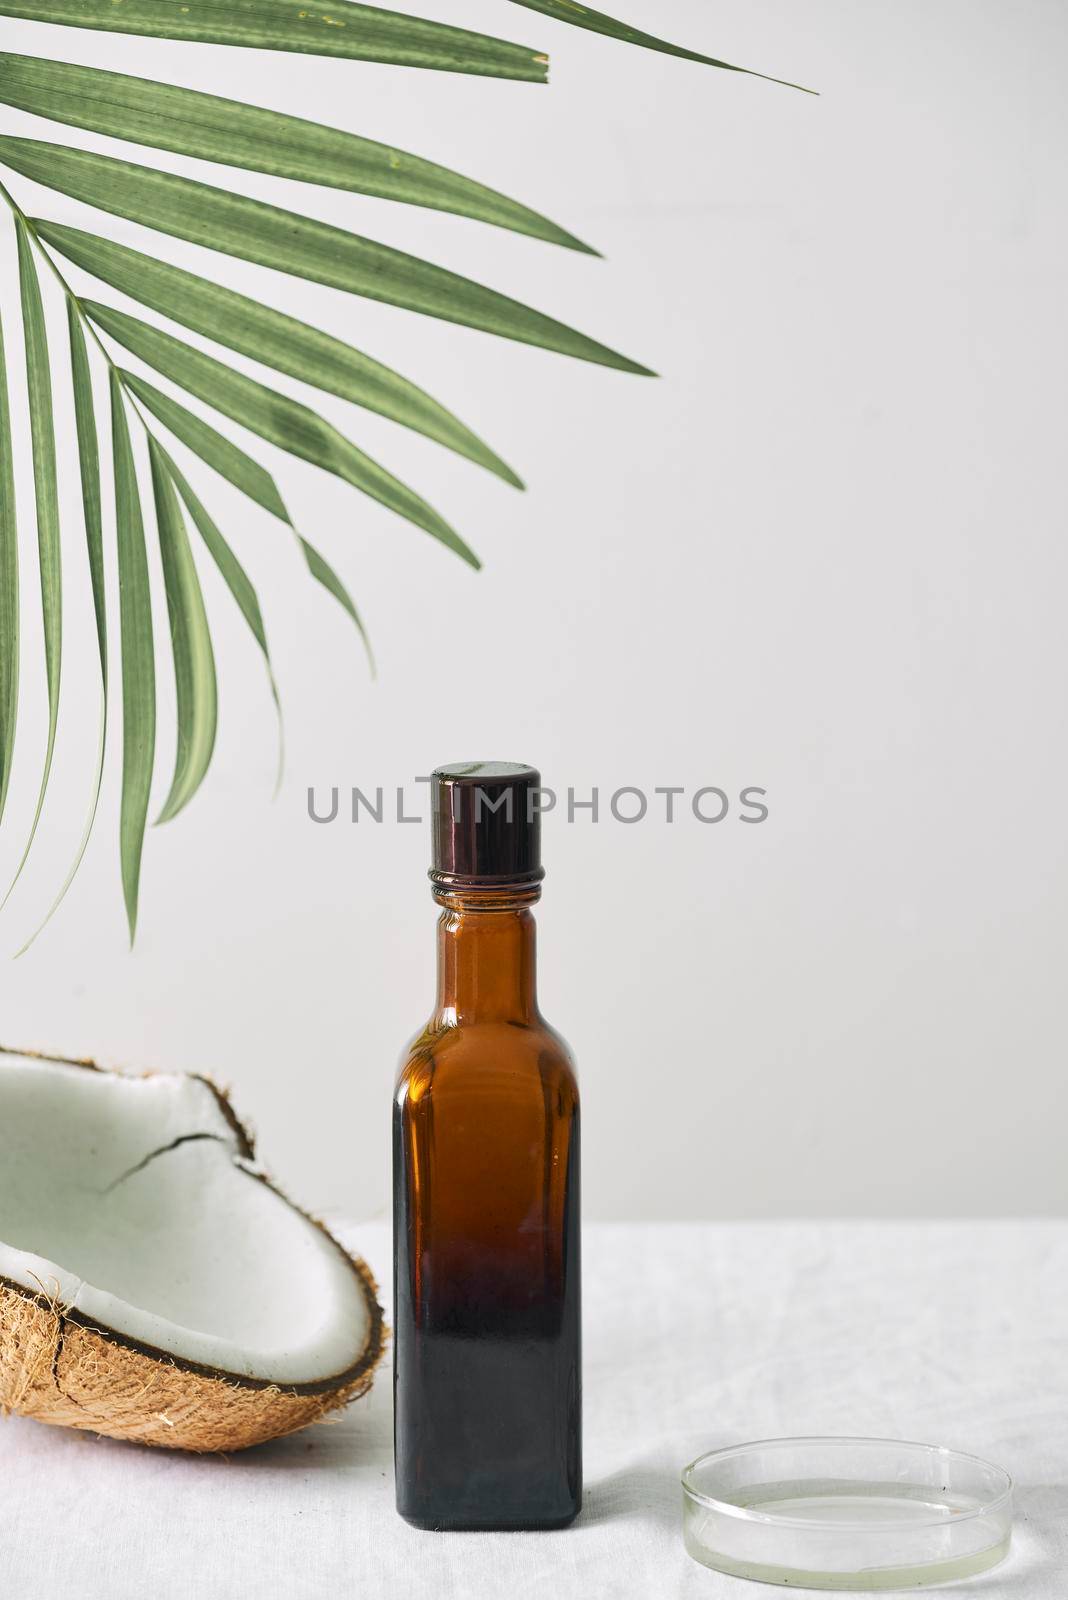 Spa cosmetics in brown glass bottles on gray concrete table. Copy space. Beauty blogger, salon therapy, minimalism concept